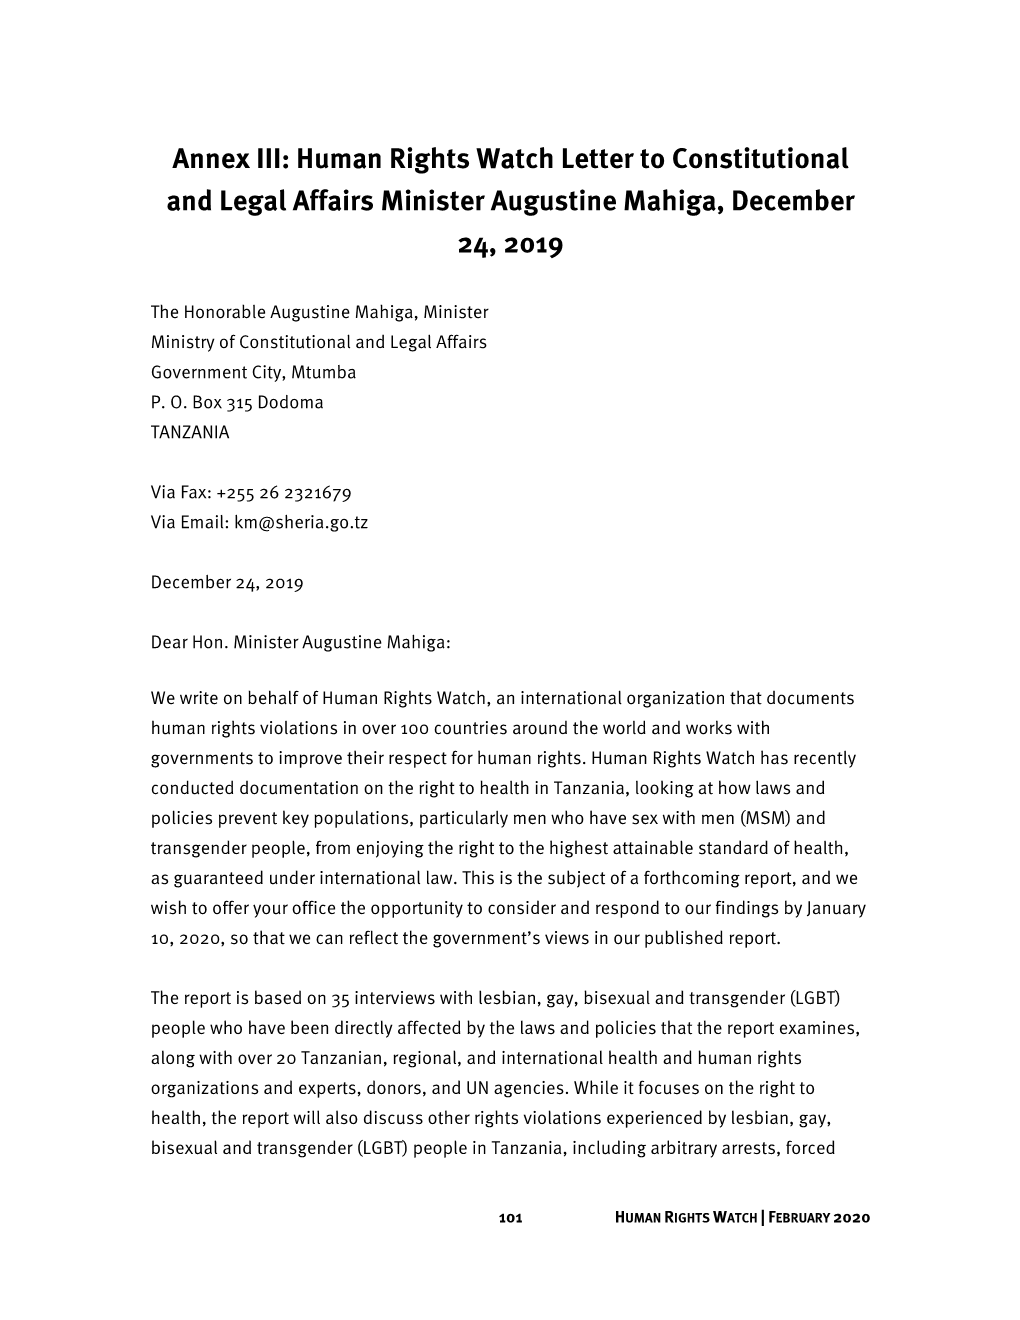 Annex III: Human Rights Watch Letter to Constitutional and Legal Affairs Minister Augustine Mahiga, December 24, 2019